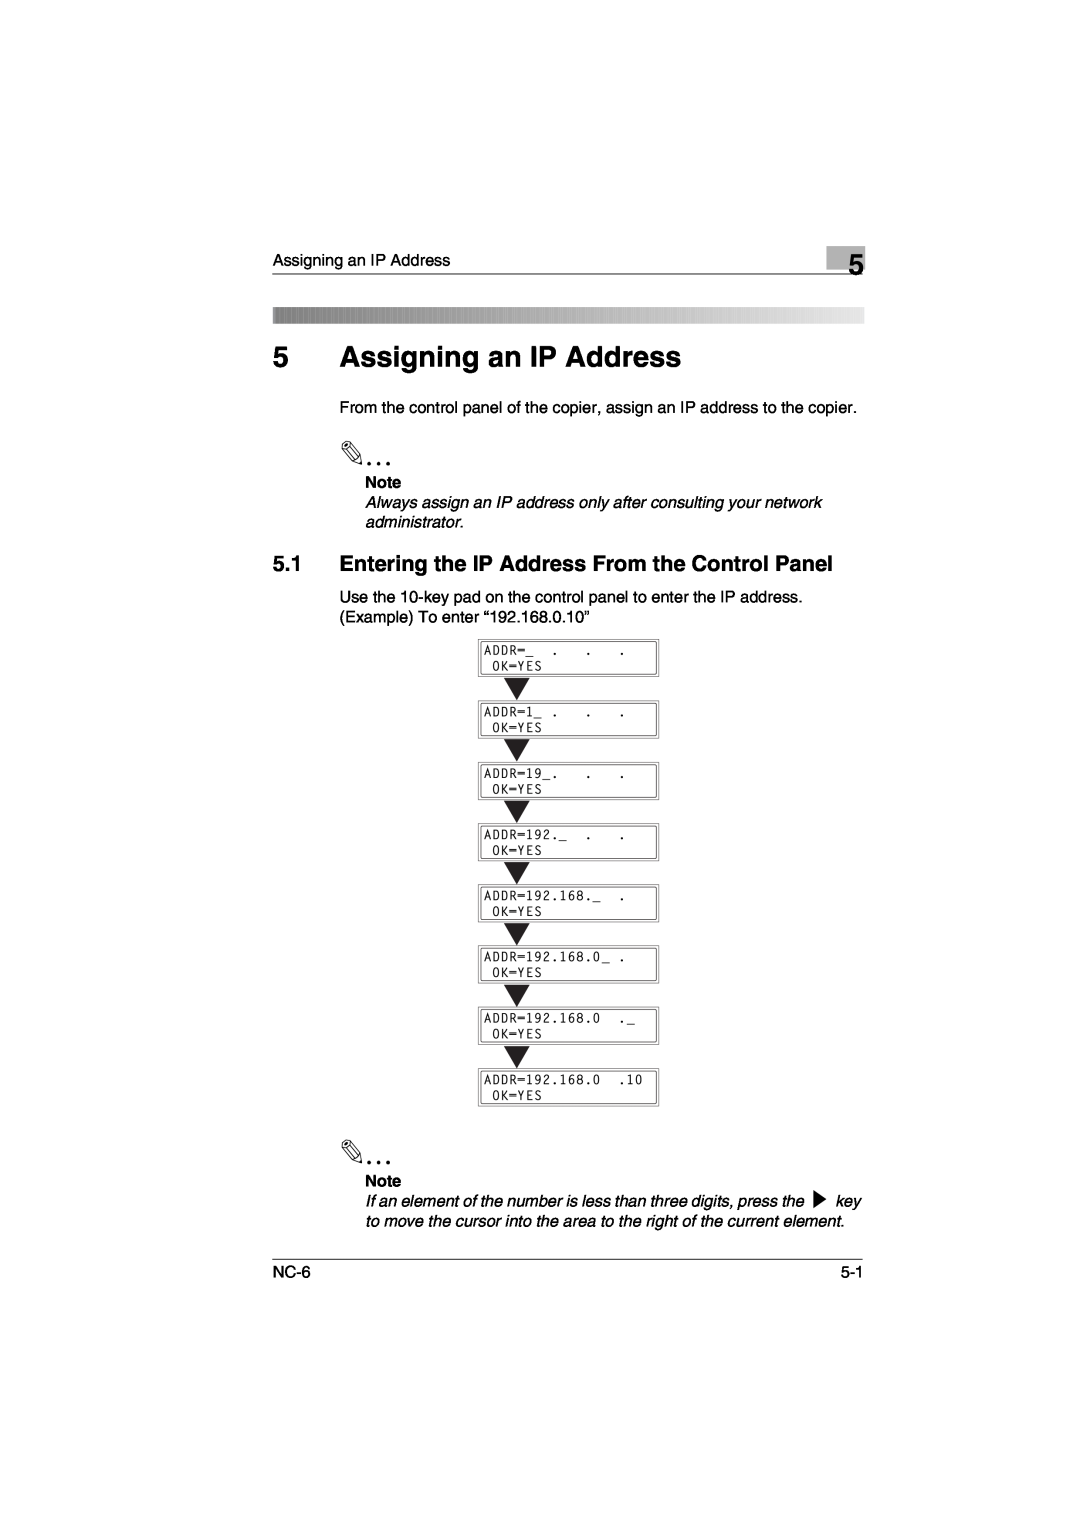 Konica Minolta NC-6 user manual Assigning an IP Address, Entering the IP Address From the Control Panel 